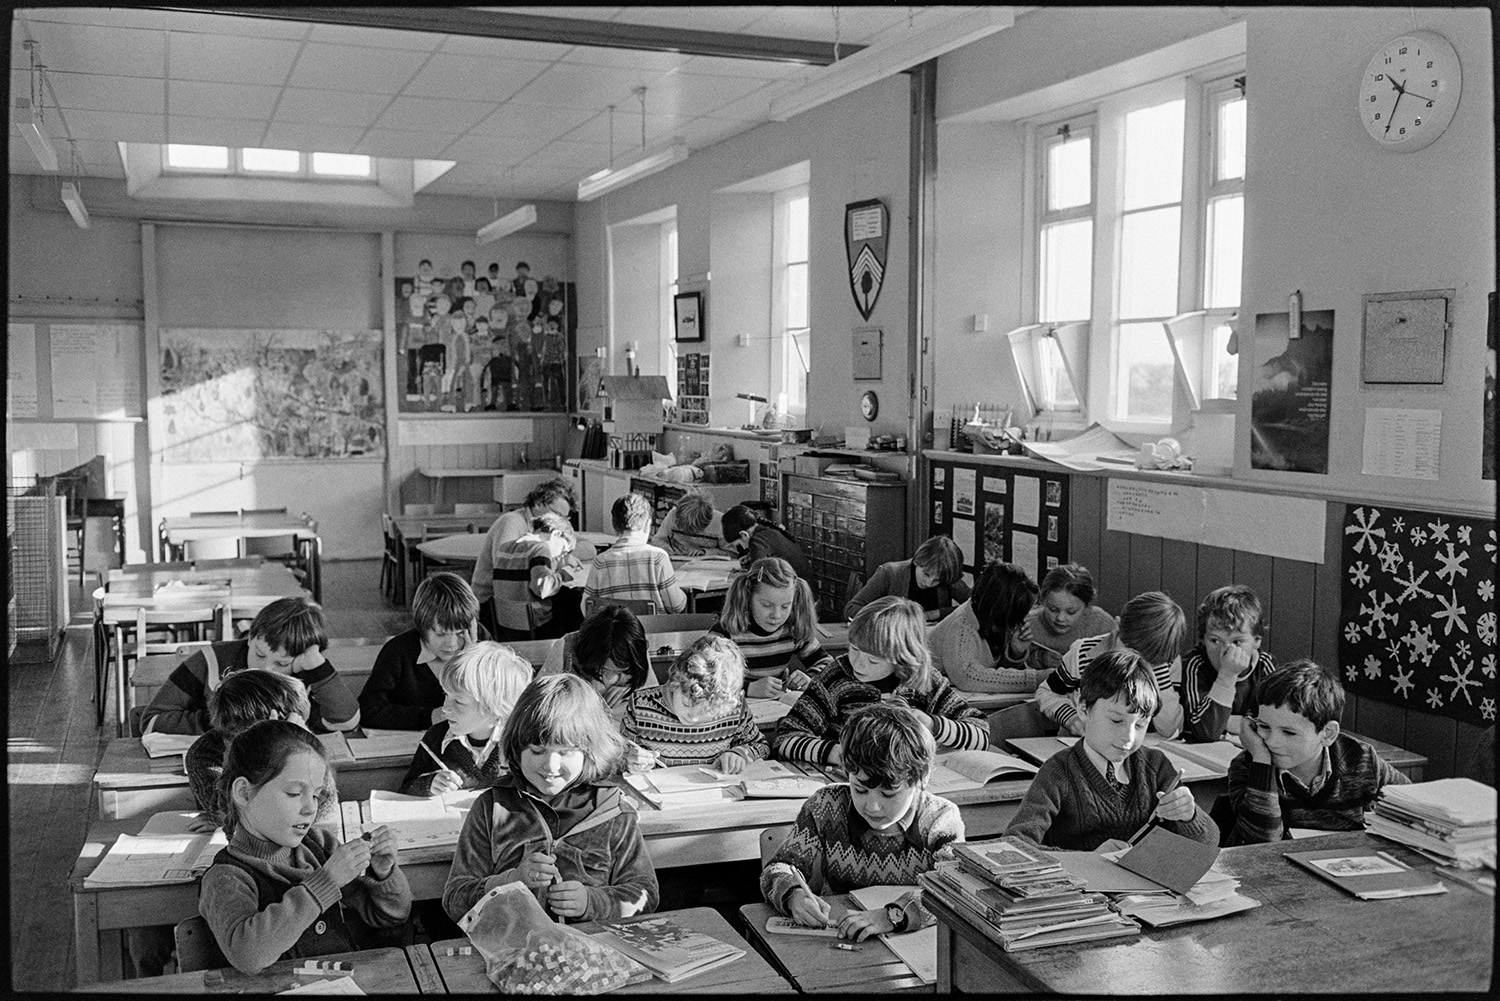 Primary school classroom with headmistress teaching, views of full classroom. 
[Schoolchildren working in a classroom at Burrington Primary School. Their school work is displayed on the walls of the classroom.]